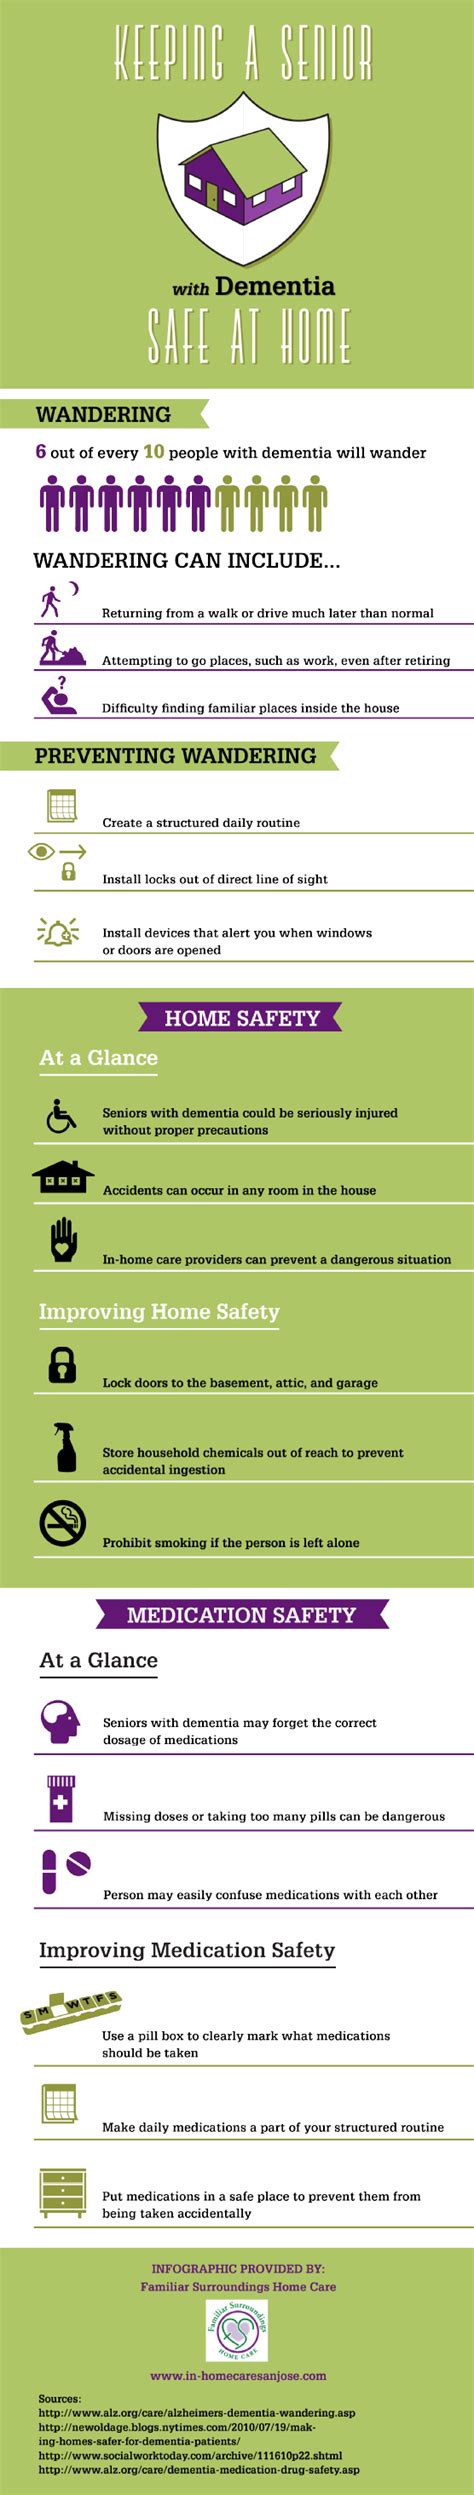 How to keep a #senior with #dementia safe at home: great infographic | Dementia, Home health ...